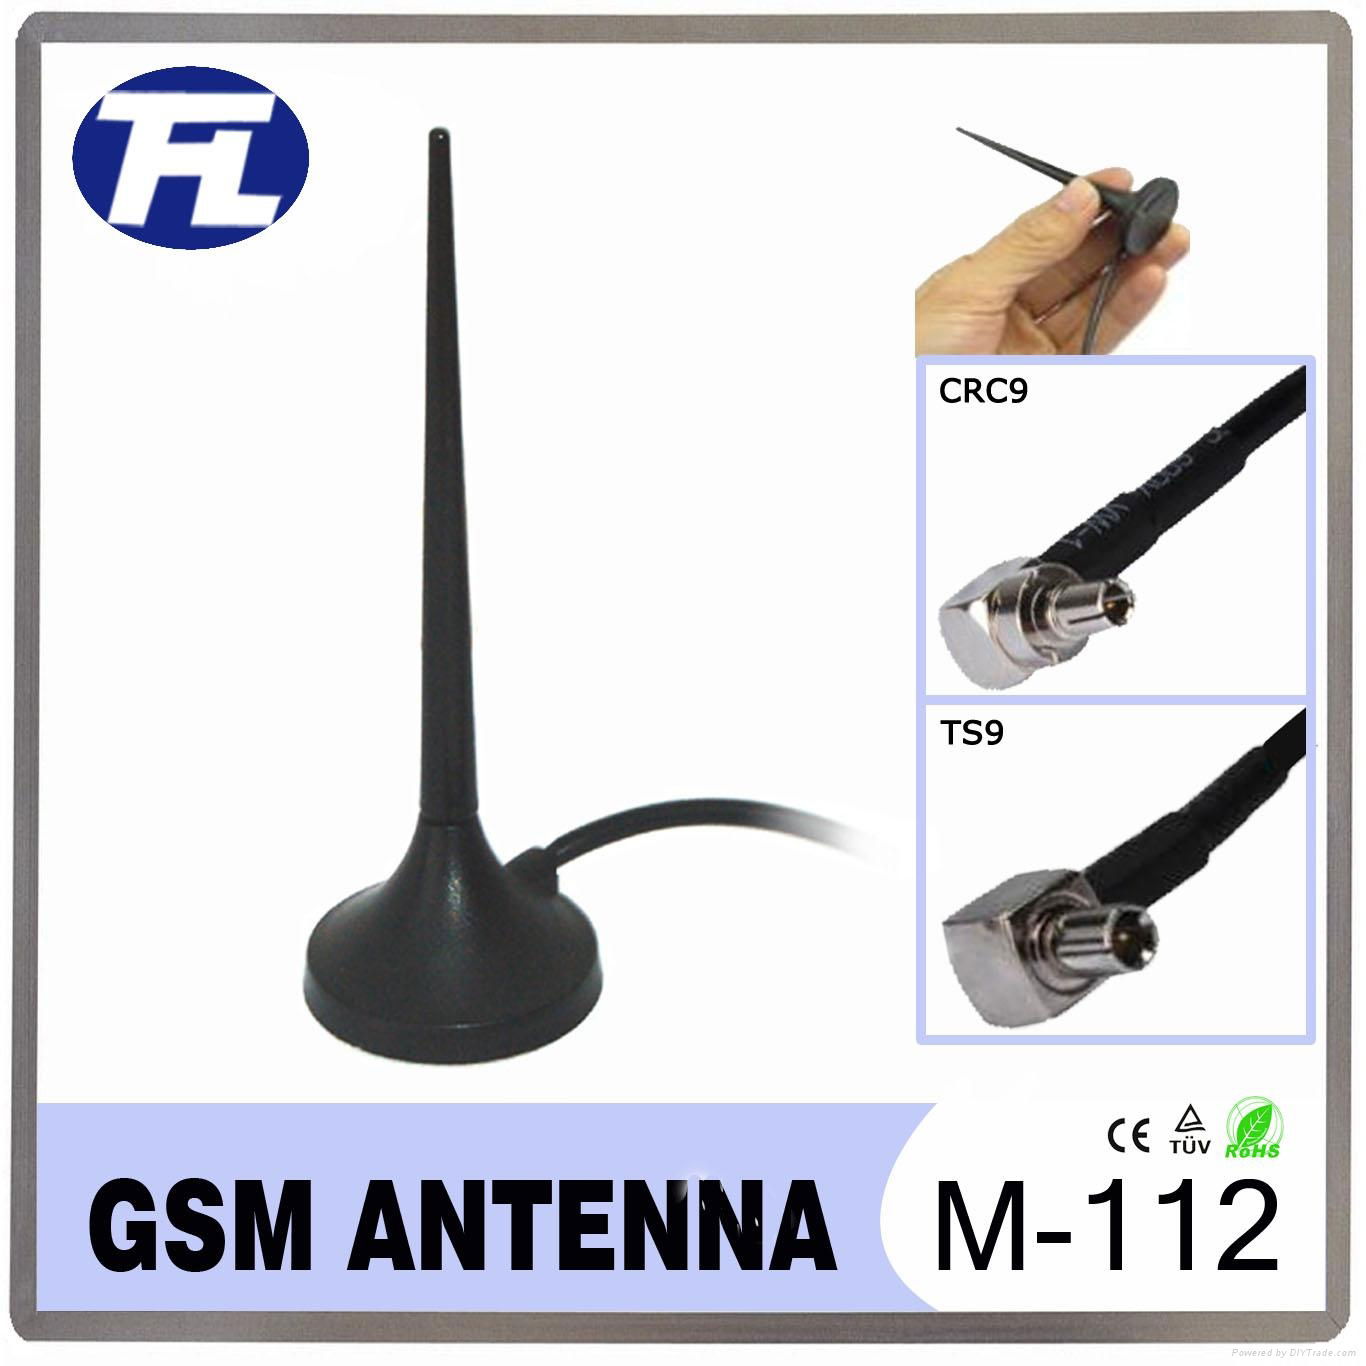 Magnetic Base GSM UMTS HSPA CDMA 3G Antenna CRC9 TS9 Connect for Huawei Modem 2